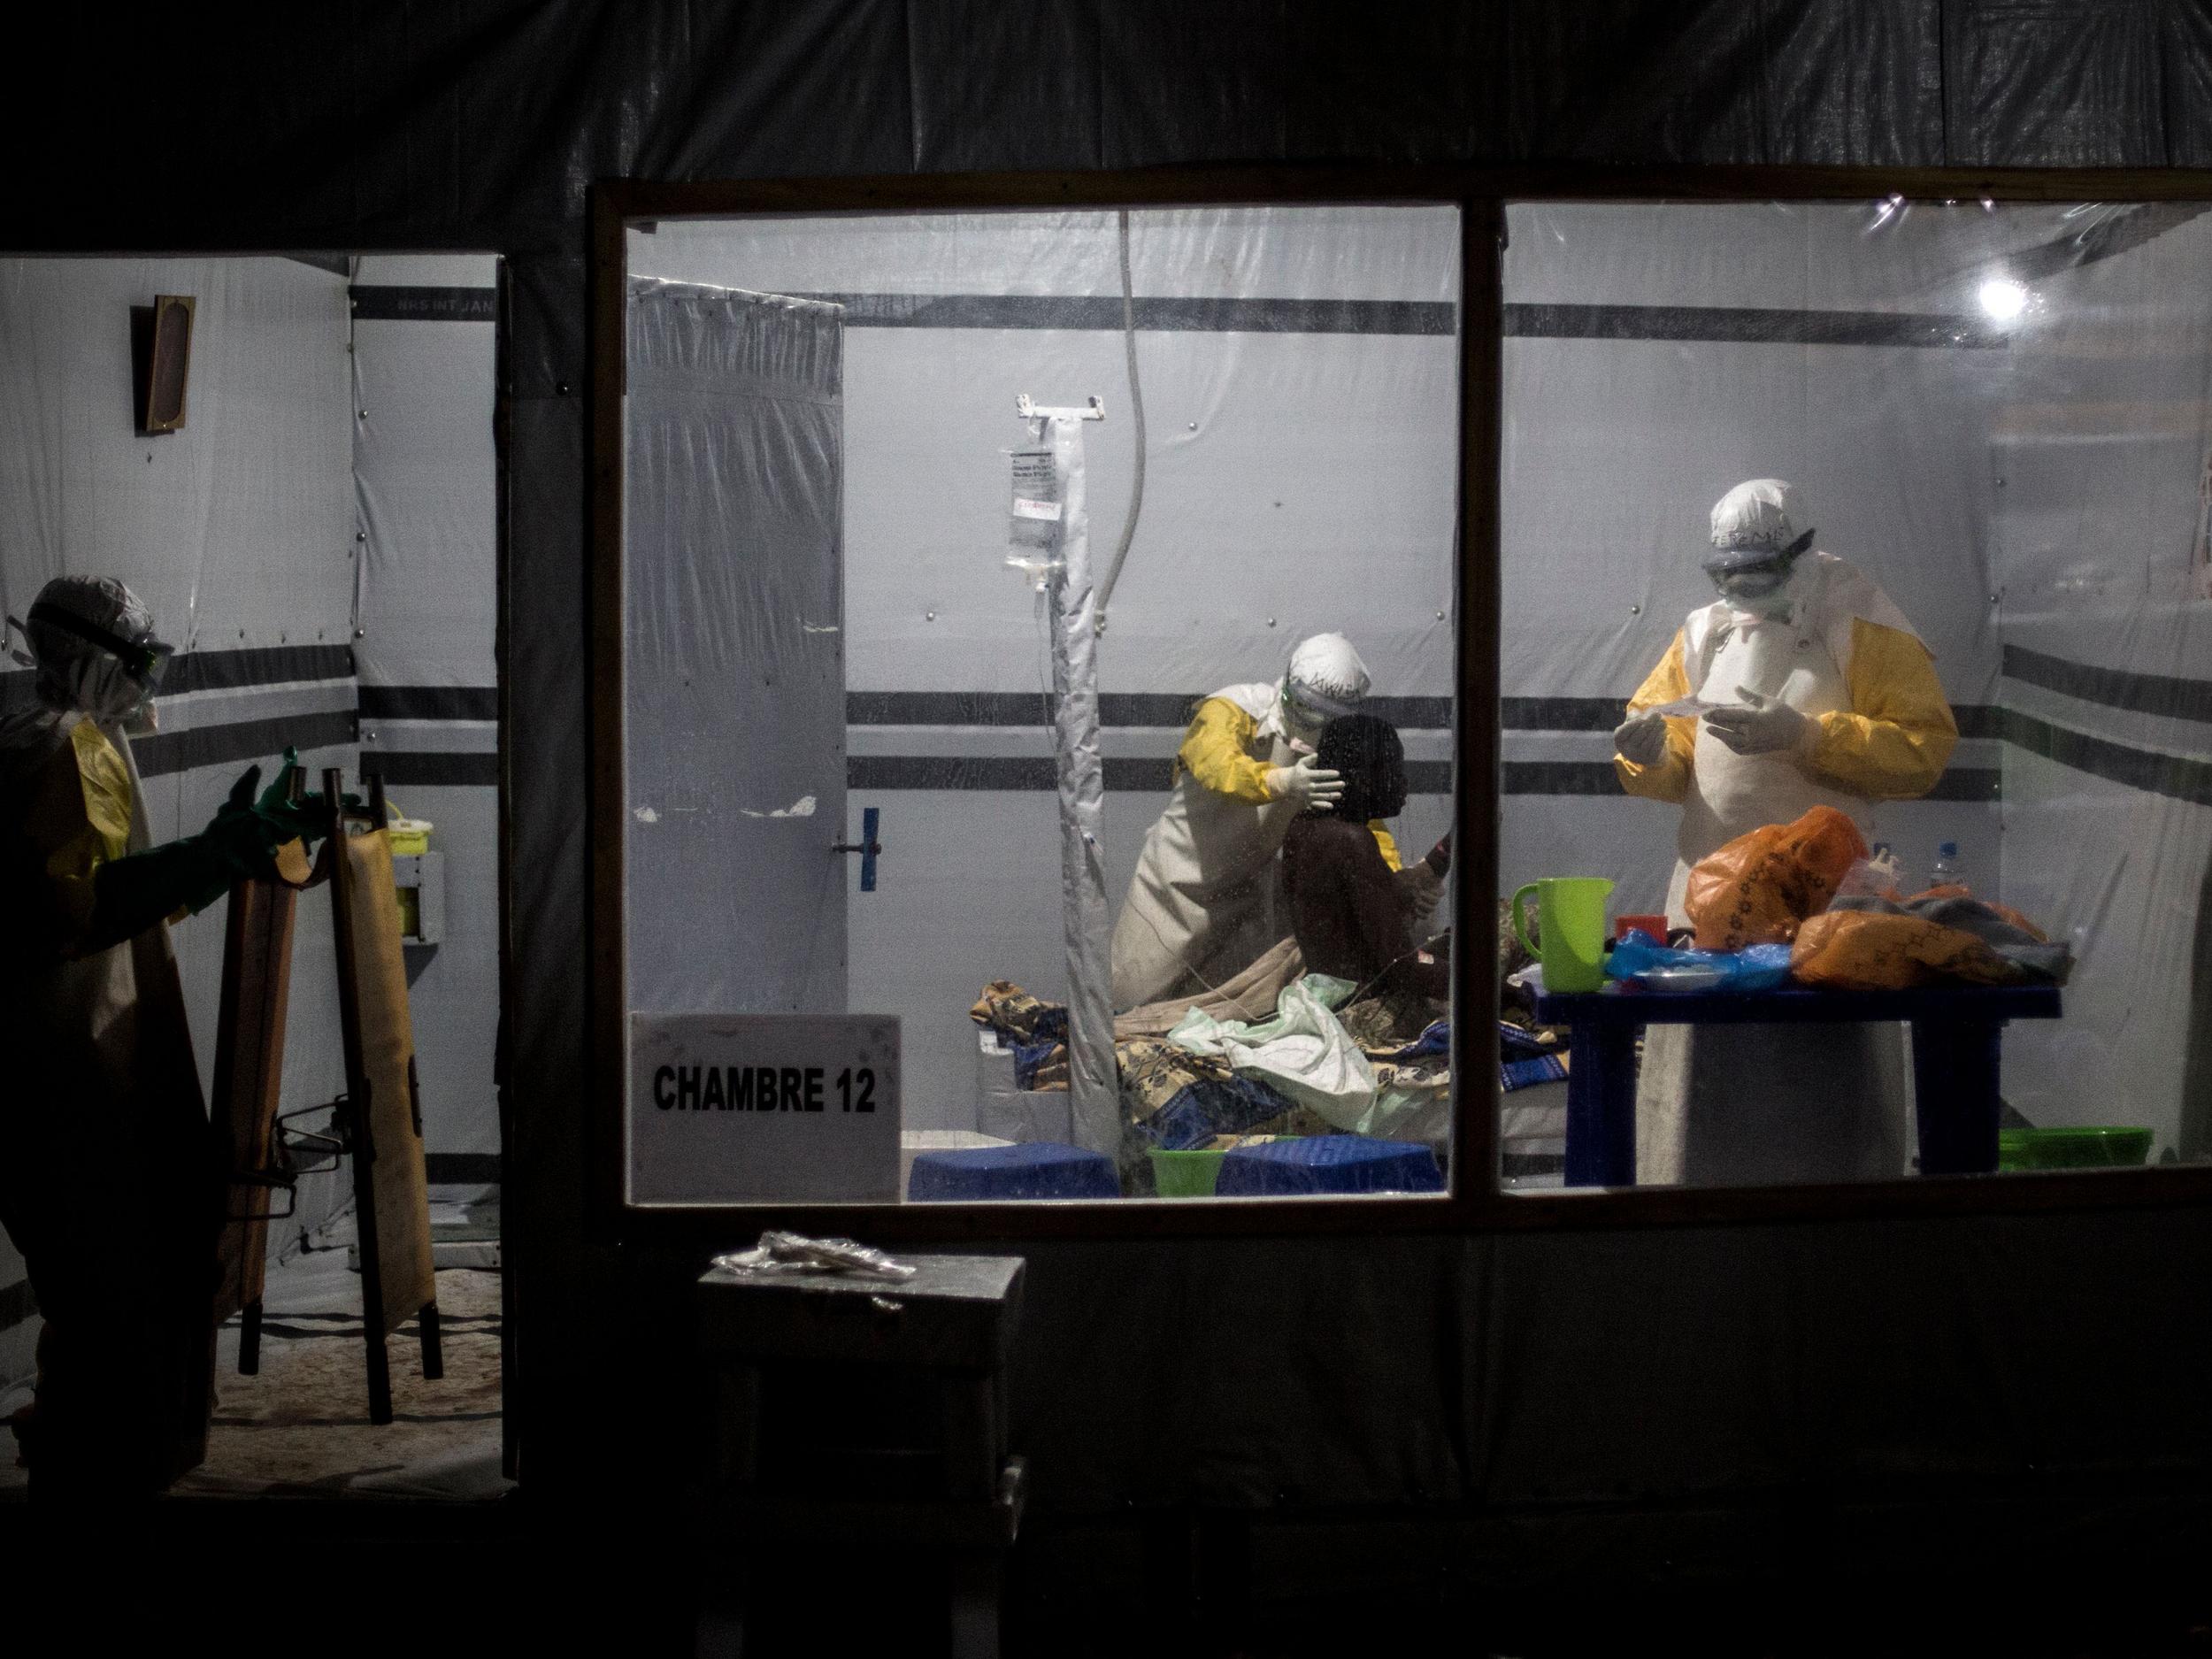 Health workers treat an unconfirmed Ebola patient, inside a treatment centre on November 3, 2018 in Butembo, Democratic Republic of the Congo